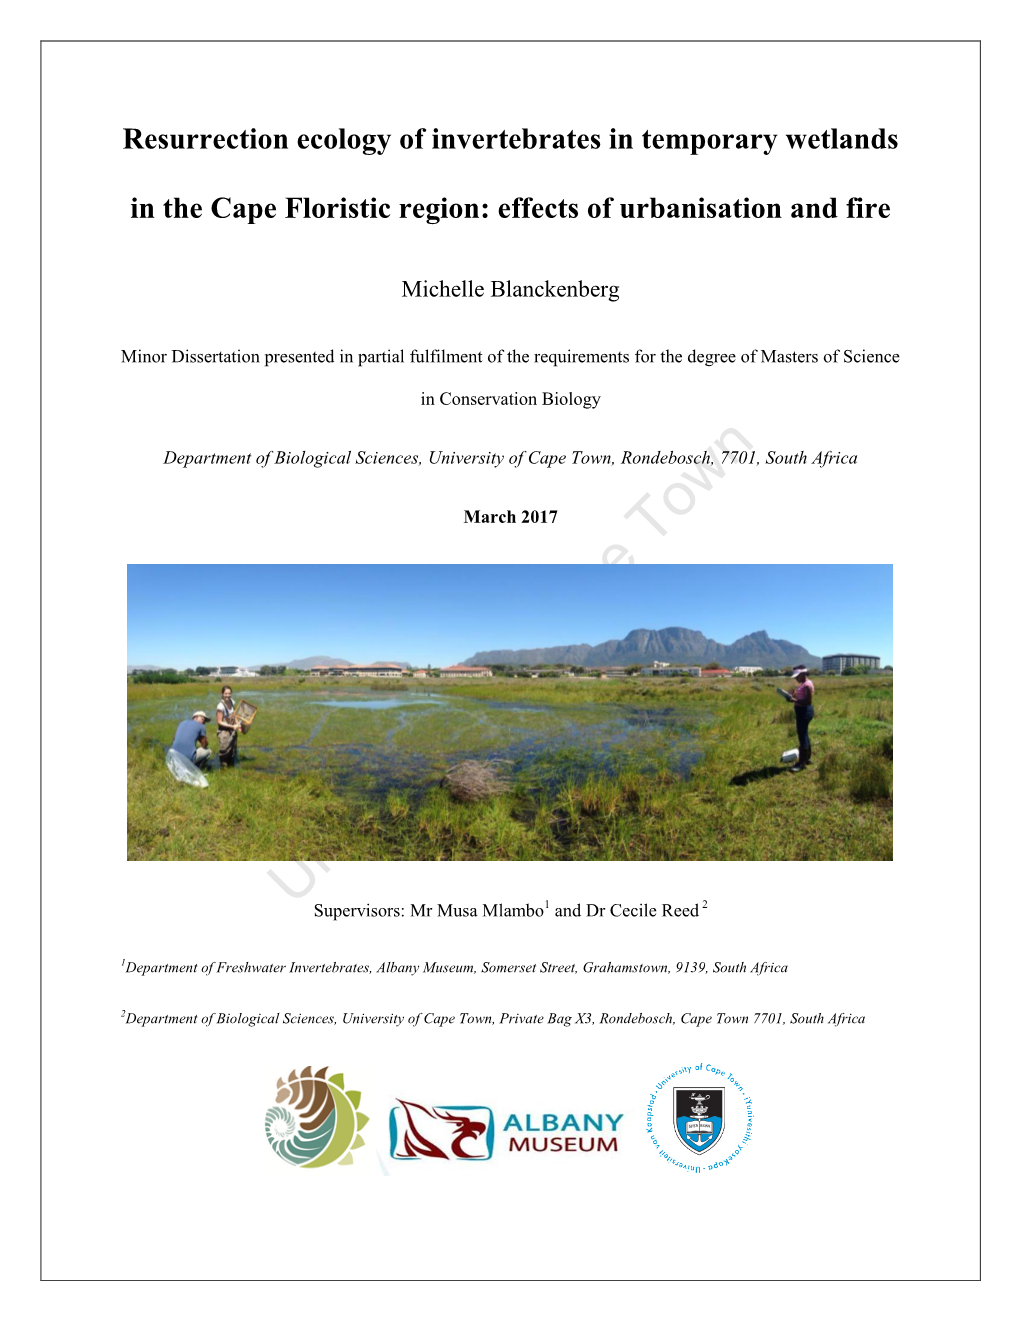 Resurrection Ecology of Invertebrates in Temporary Wetlands in the Cape Floristic Region: Effects of Urbanisation and Fire